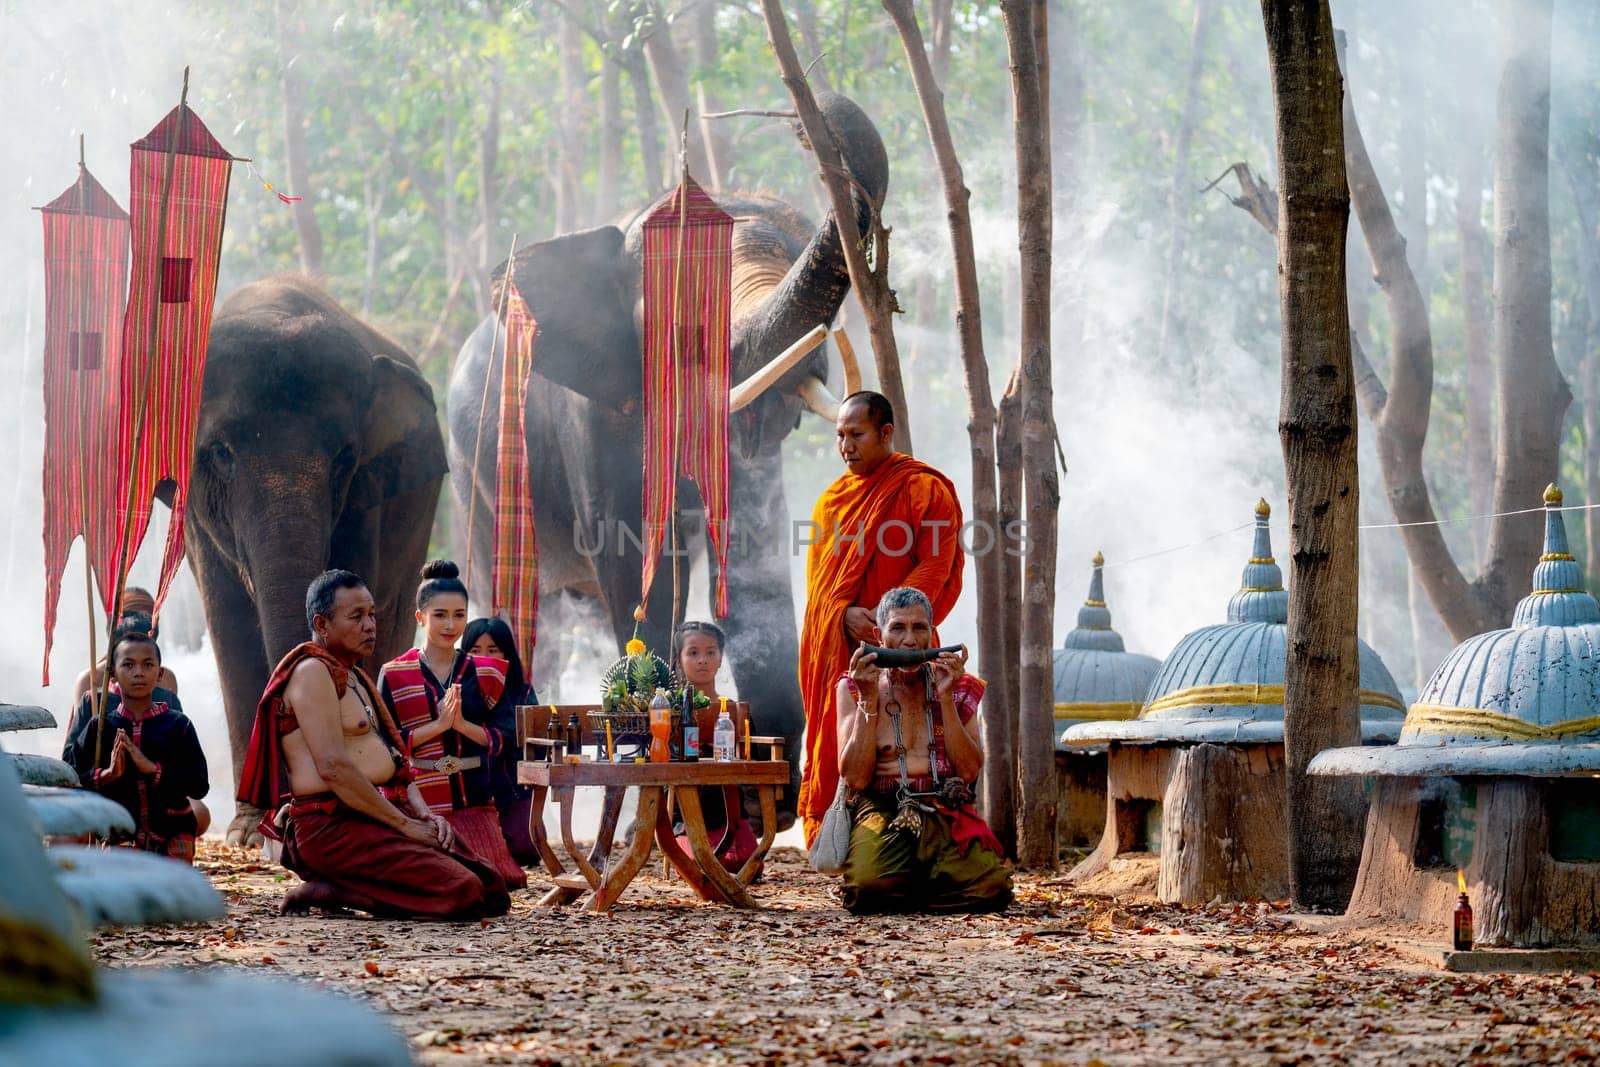 Group of people of mahout village join in traditional ceremony together in front of elephant and use old ivory as tools for the ceremony.